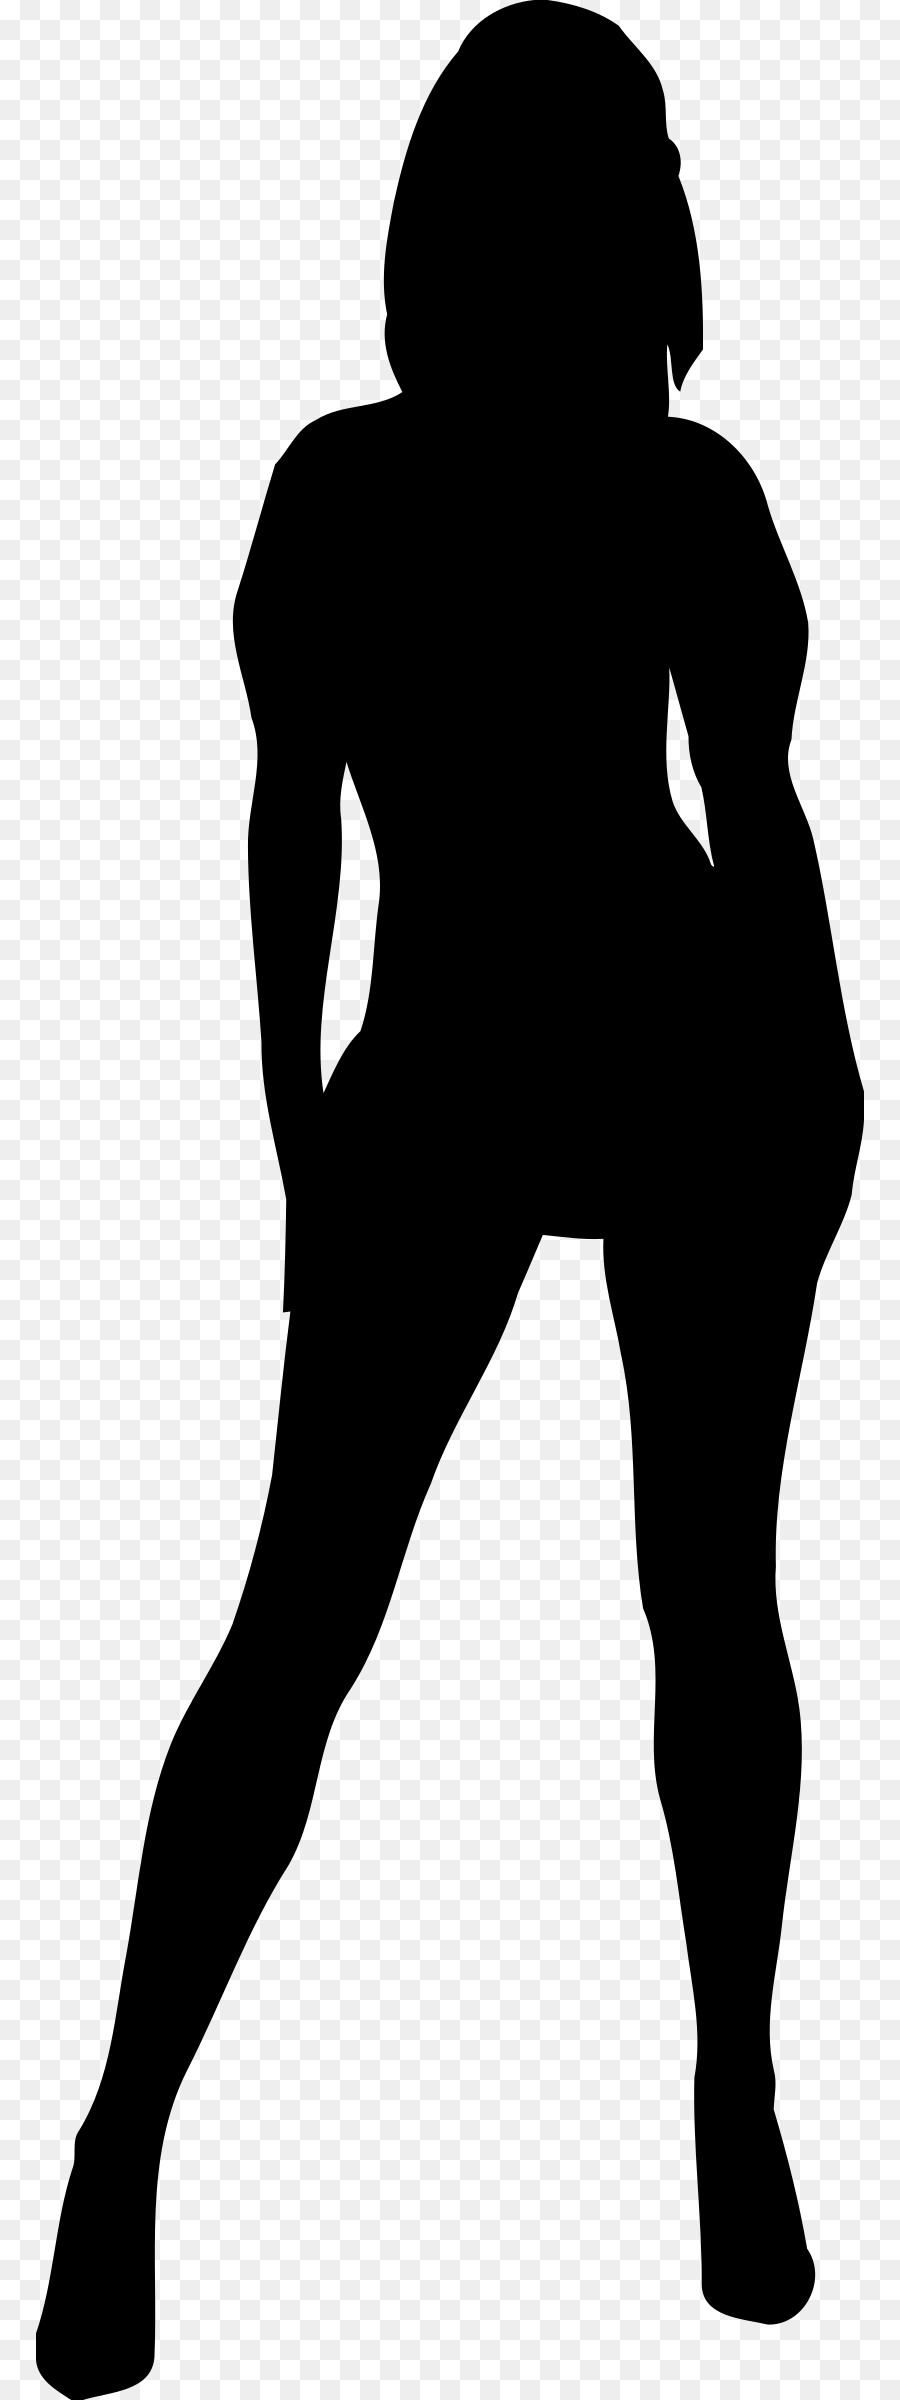 Catwoman Silhouette Female Clip art - woman silhouette png download - 828*2400 - Free Transparent Catwoman png Download.